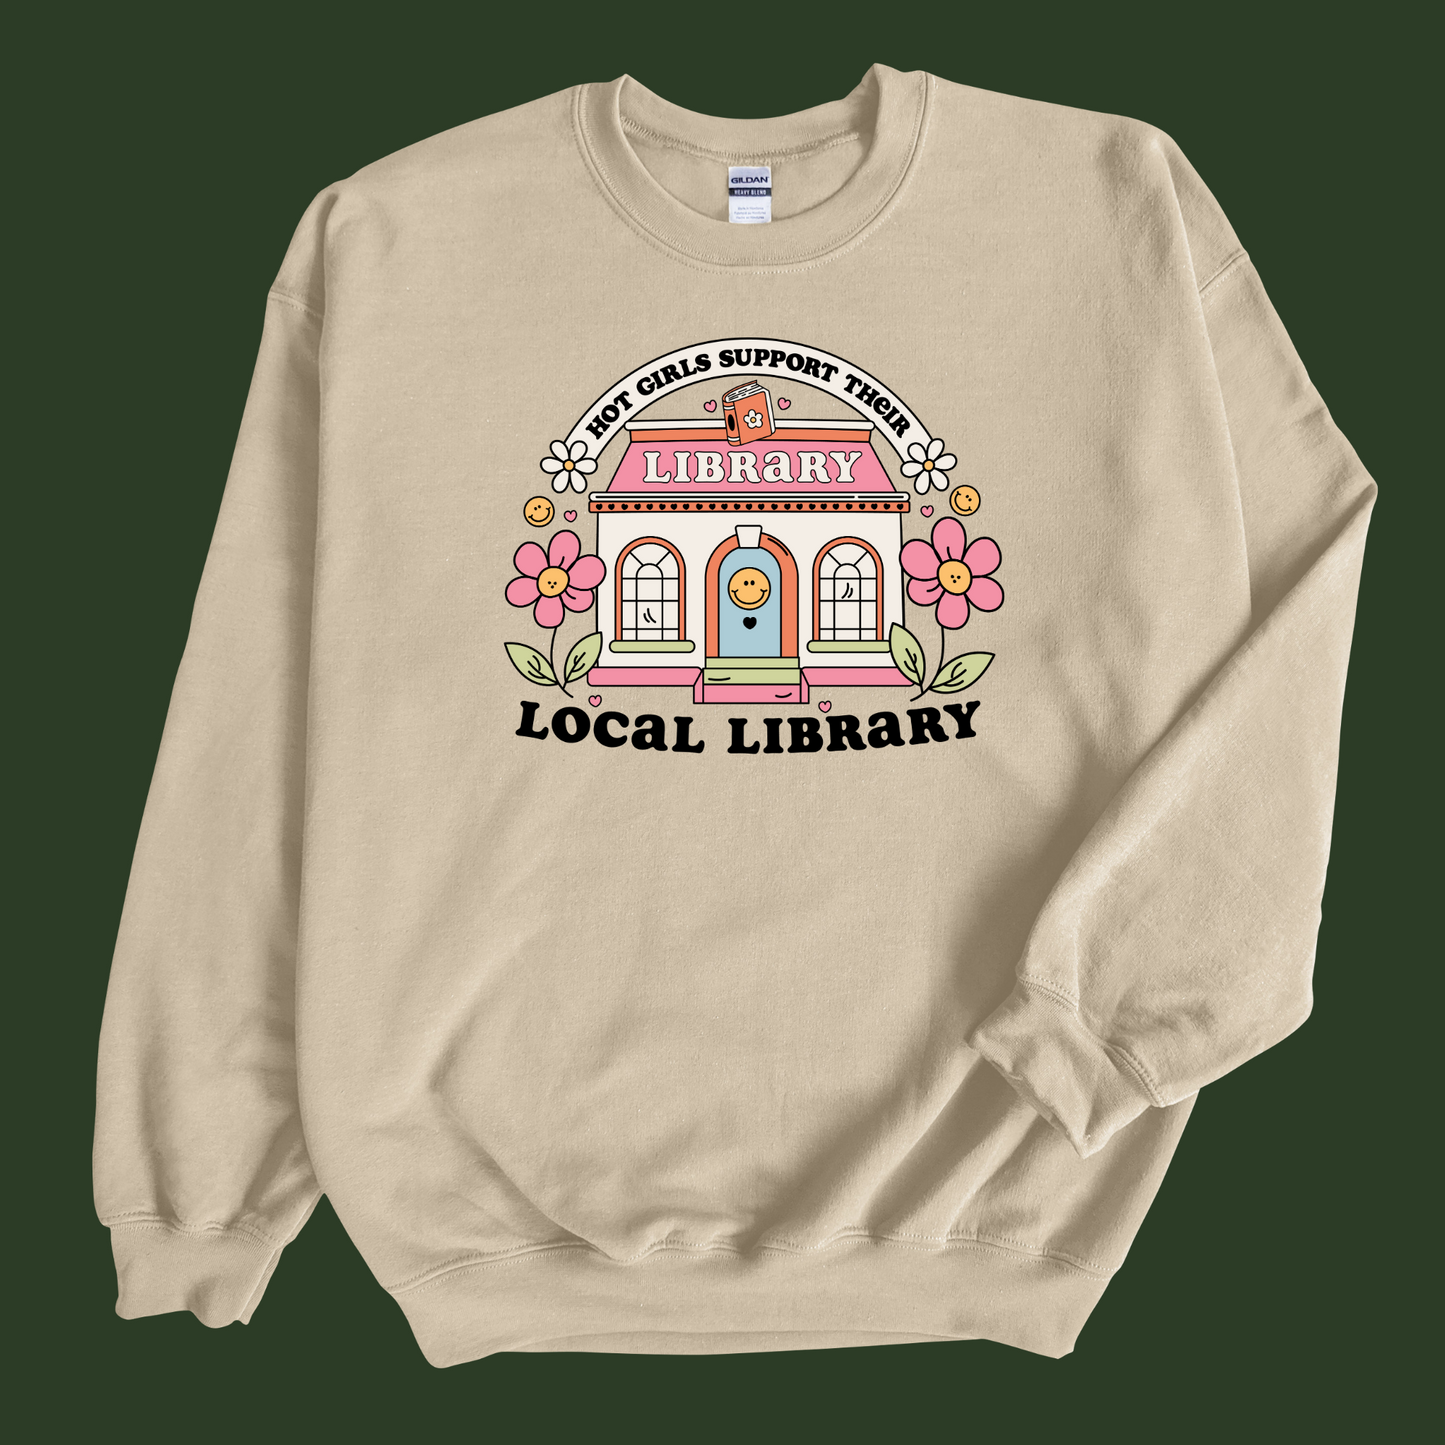 Hot Girls Support Their Local Library Sweatshirt